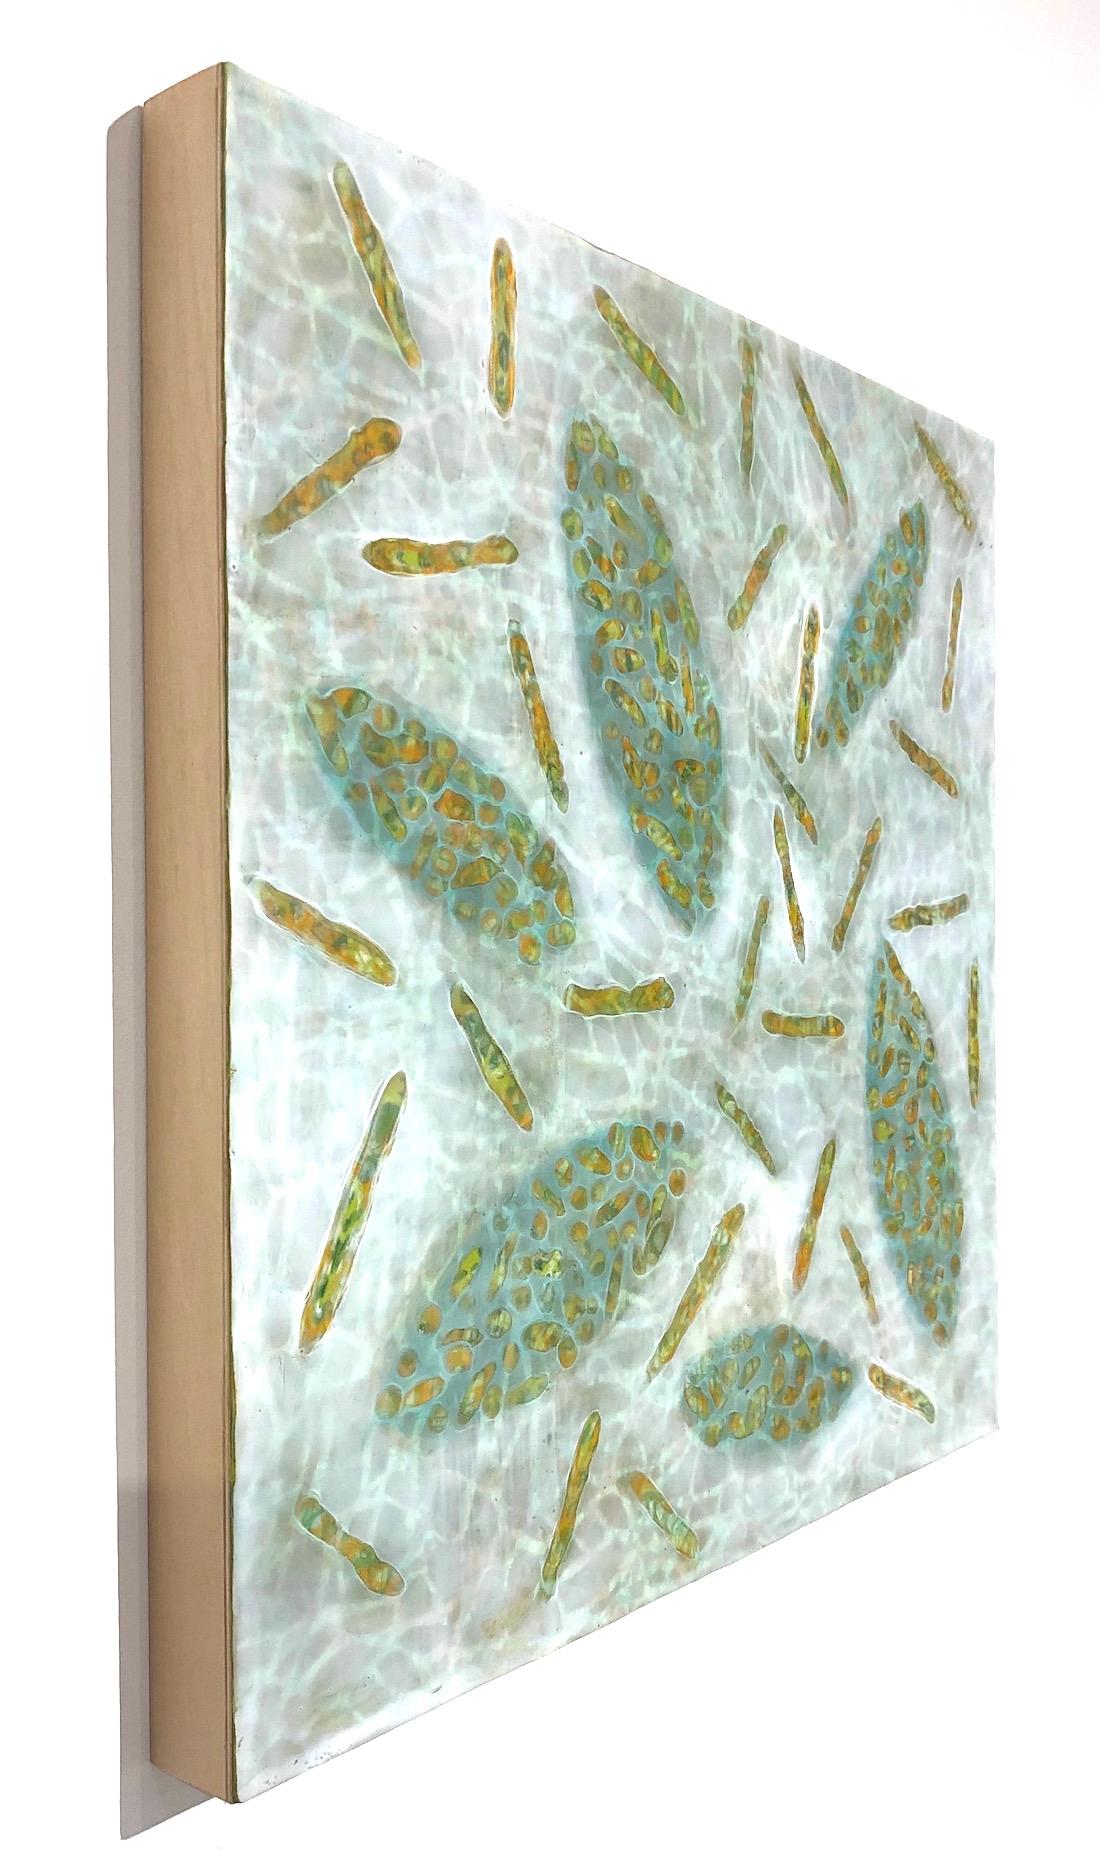 Kay Hartung’s “Bio Patterns 18” is a 20 x 20 x 1.5 inch encaustic painting composed of transparent layers depicting microscopic forms on a richly patterned background. In colors of green, white, yellow and orange, the transparent layers create a